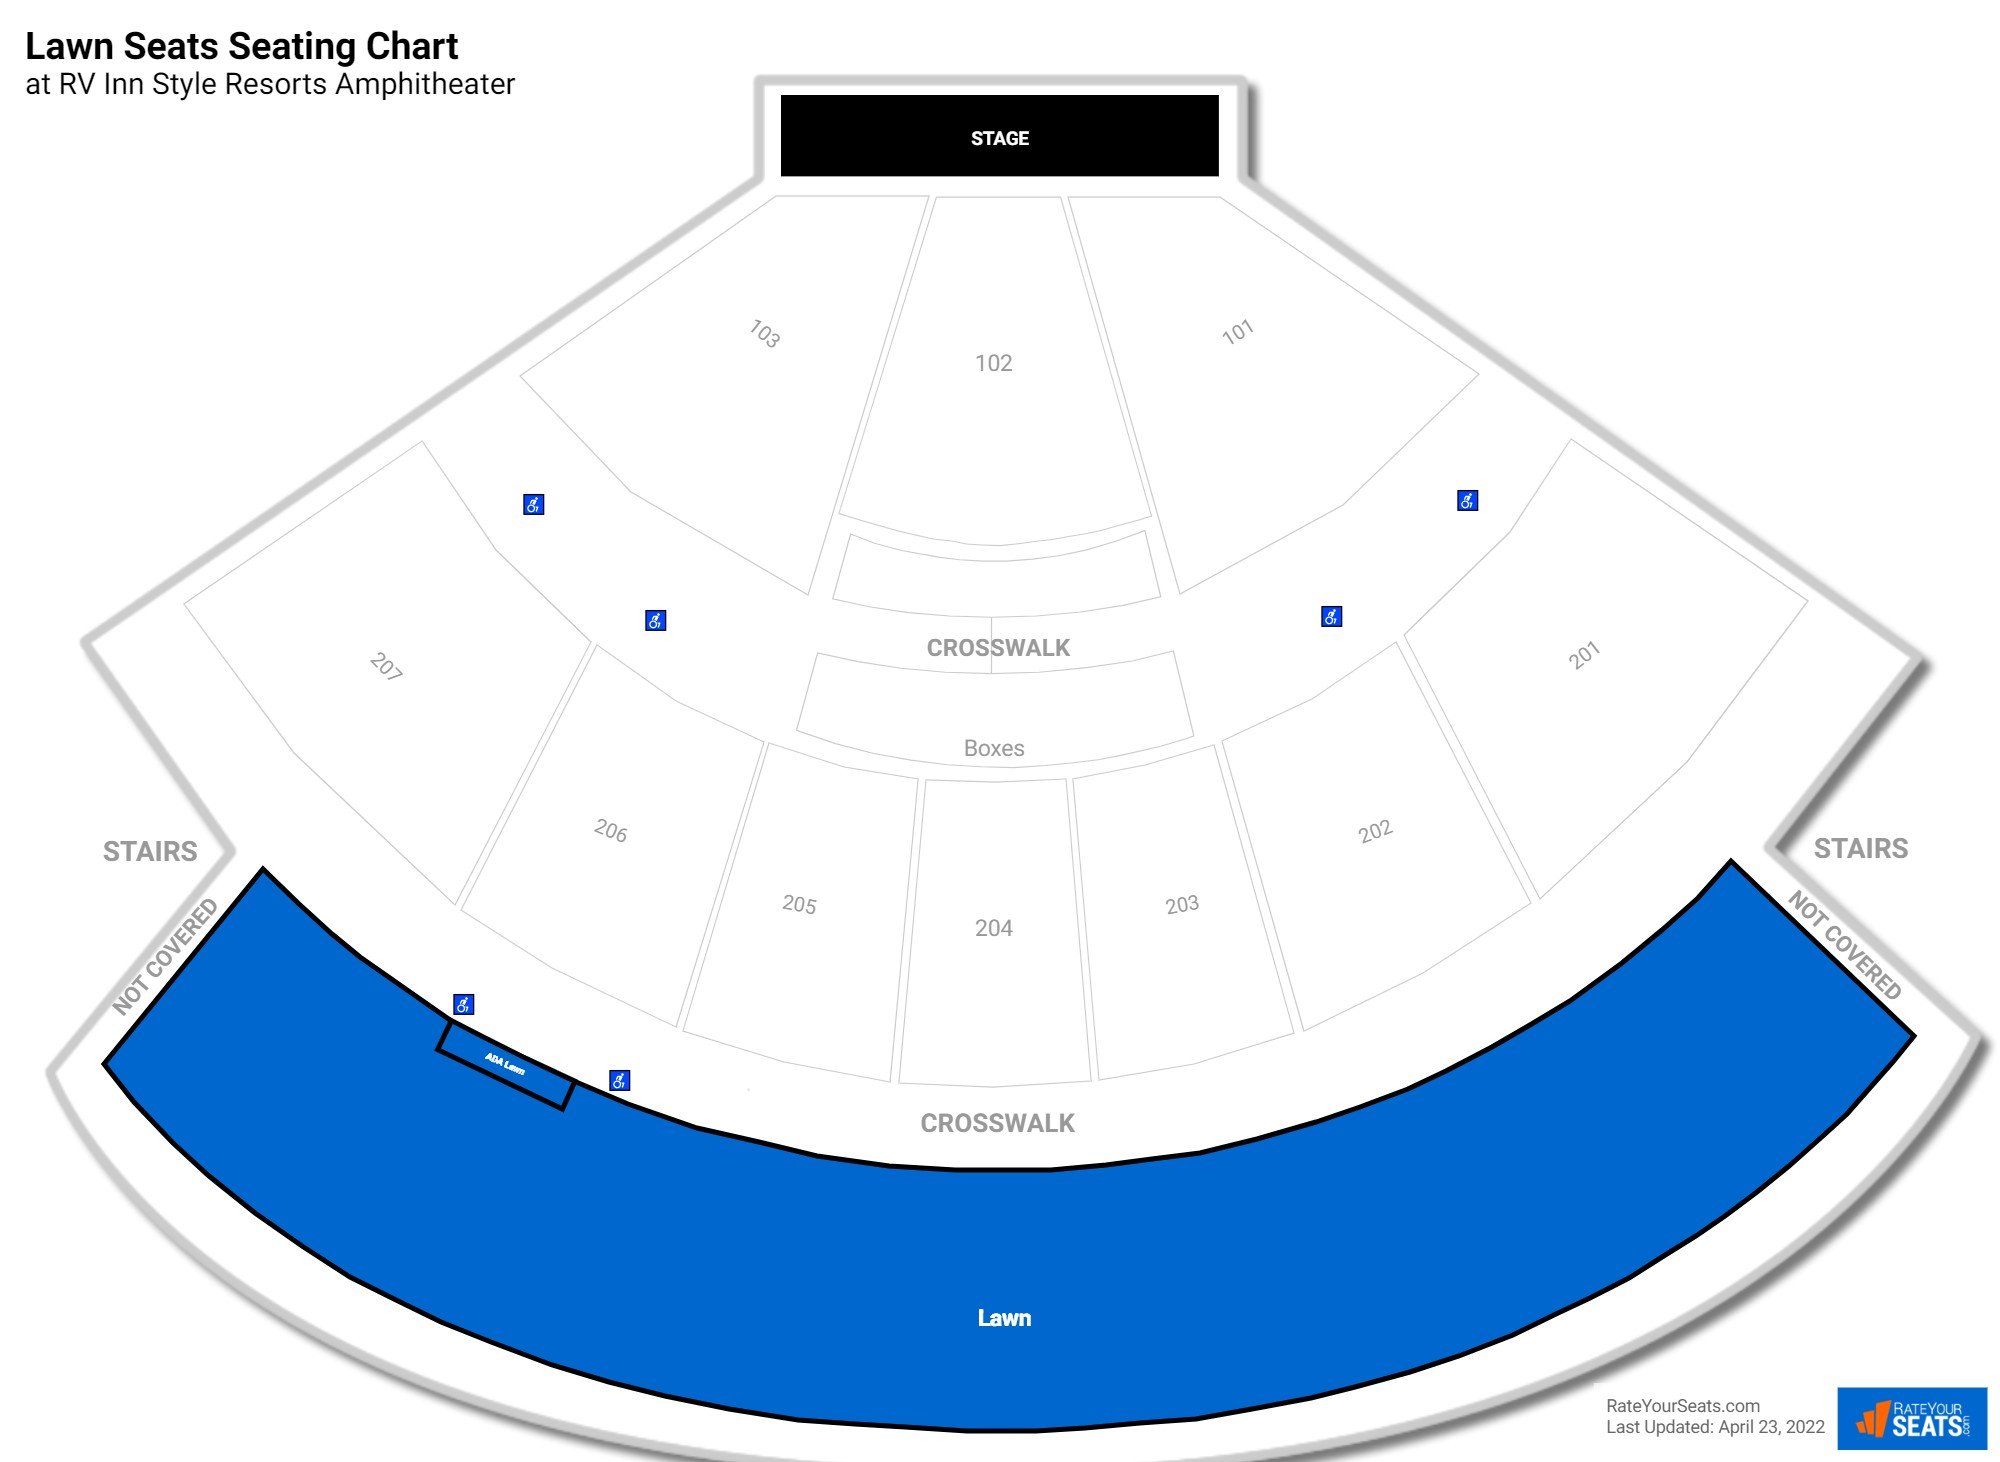 Concert Lawn Seats Seating Chart at RV Inn Style Resorts Amphitheater